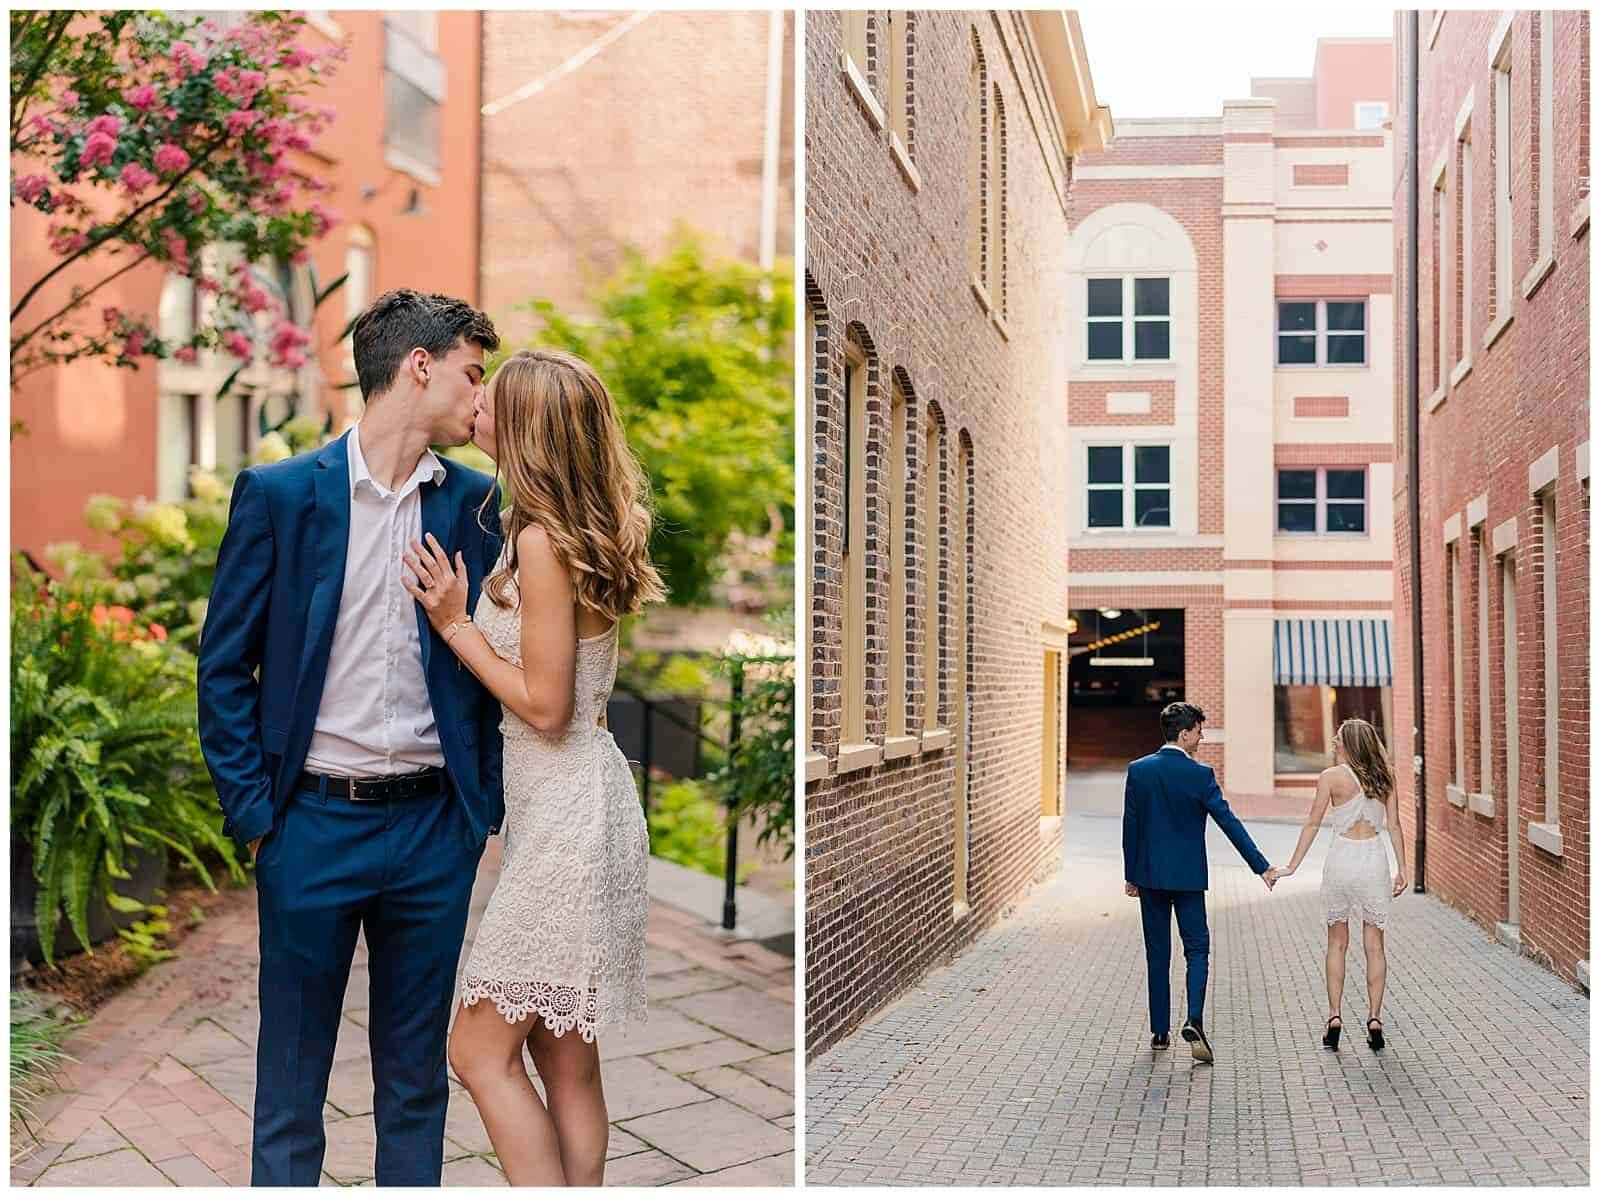 Collage of highlight images from elopement photography clients in downtown staunton virginia. Young couple is walking through downtown staunton, smiling, wearing blue suit and white sundress for their late summer elopement. 